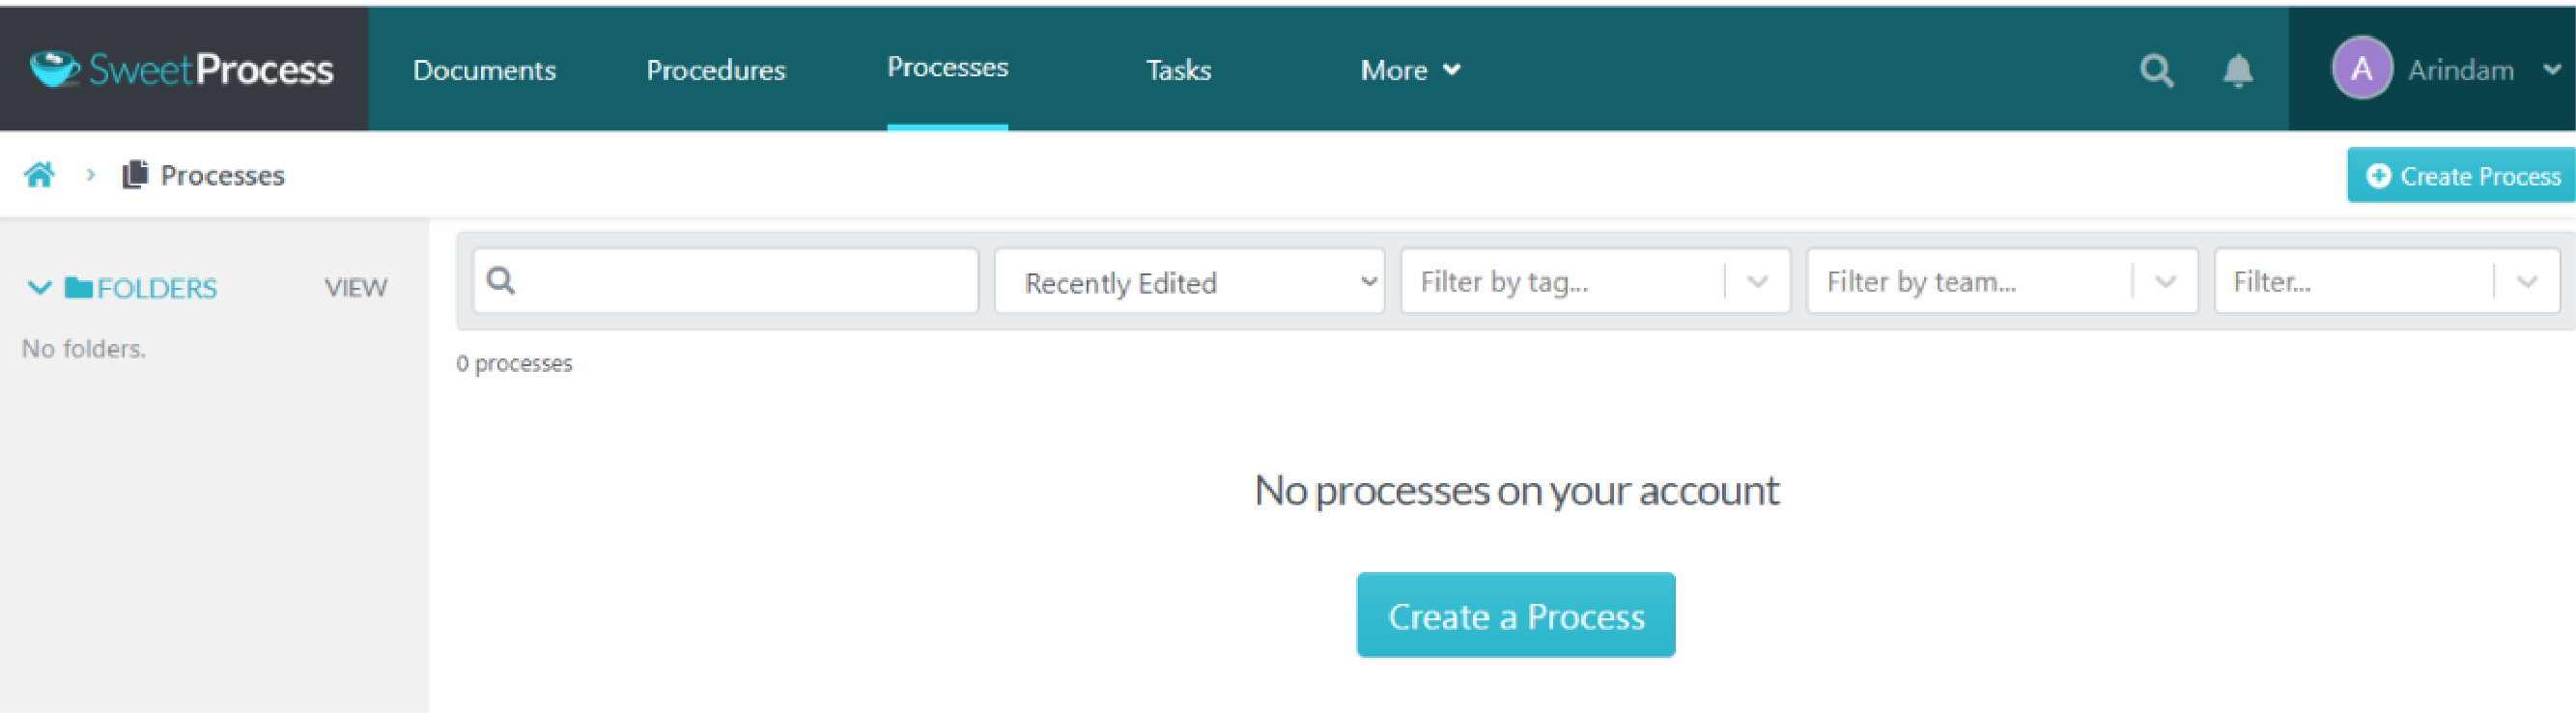 click on the Process tab